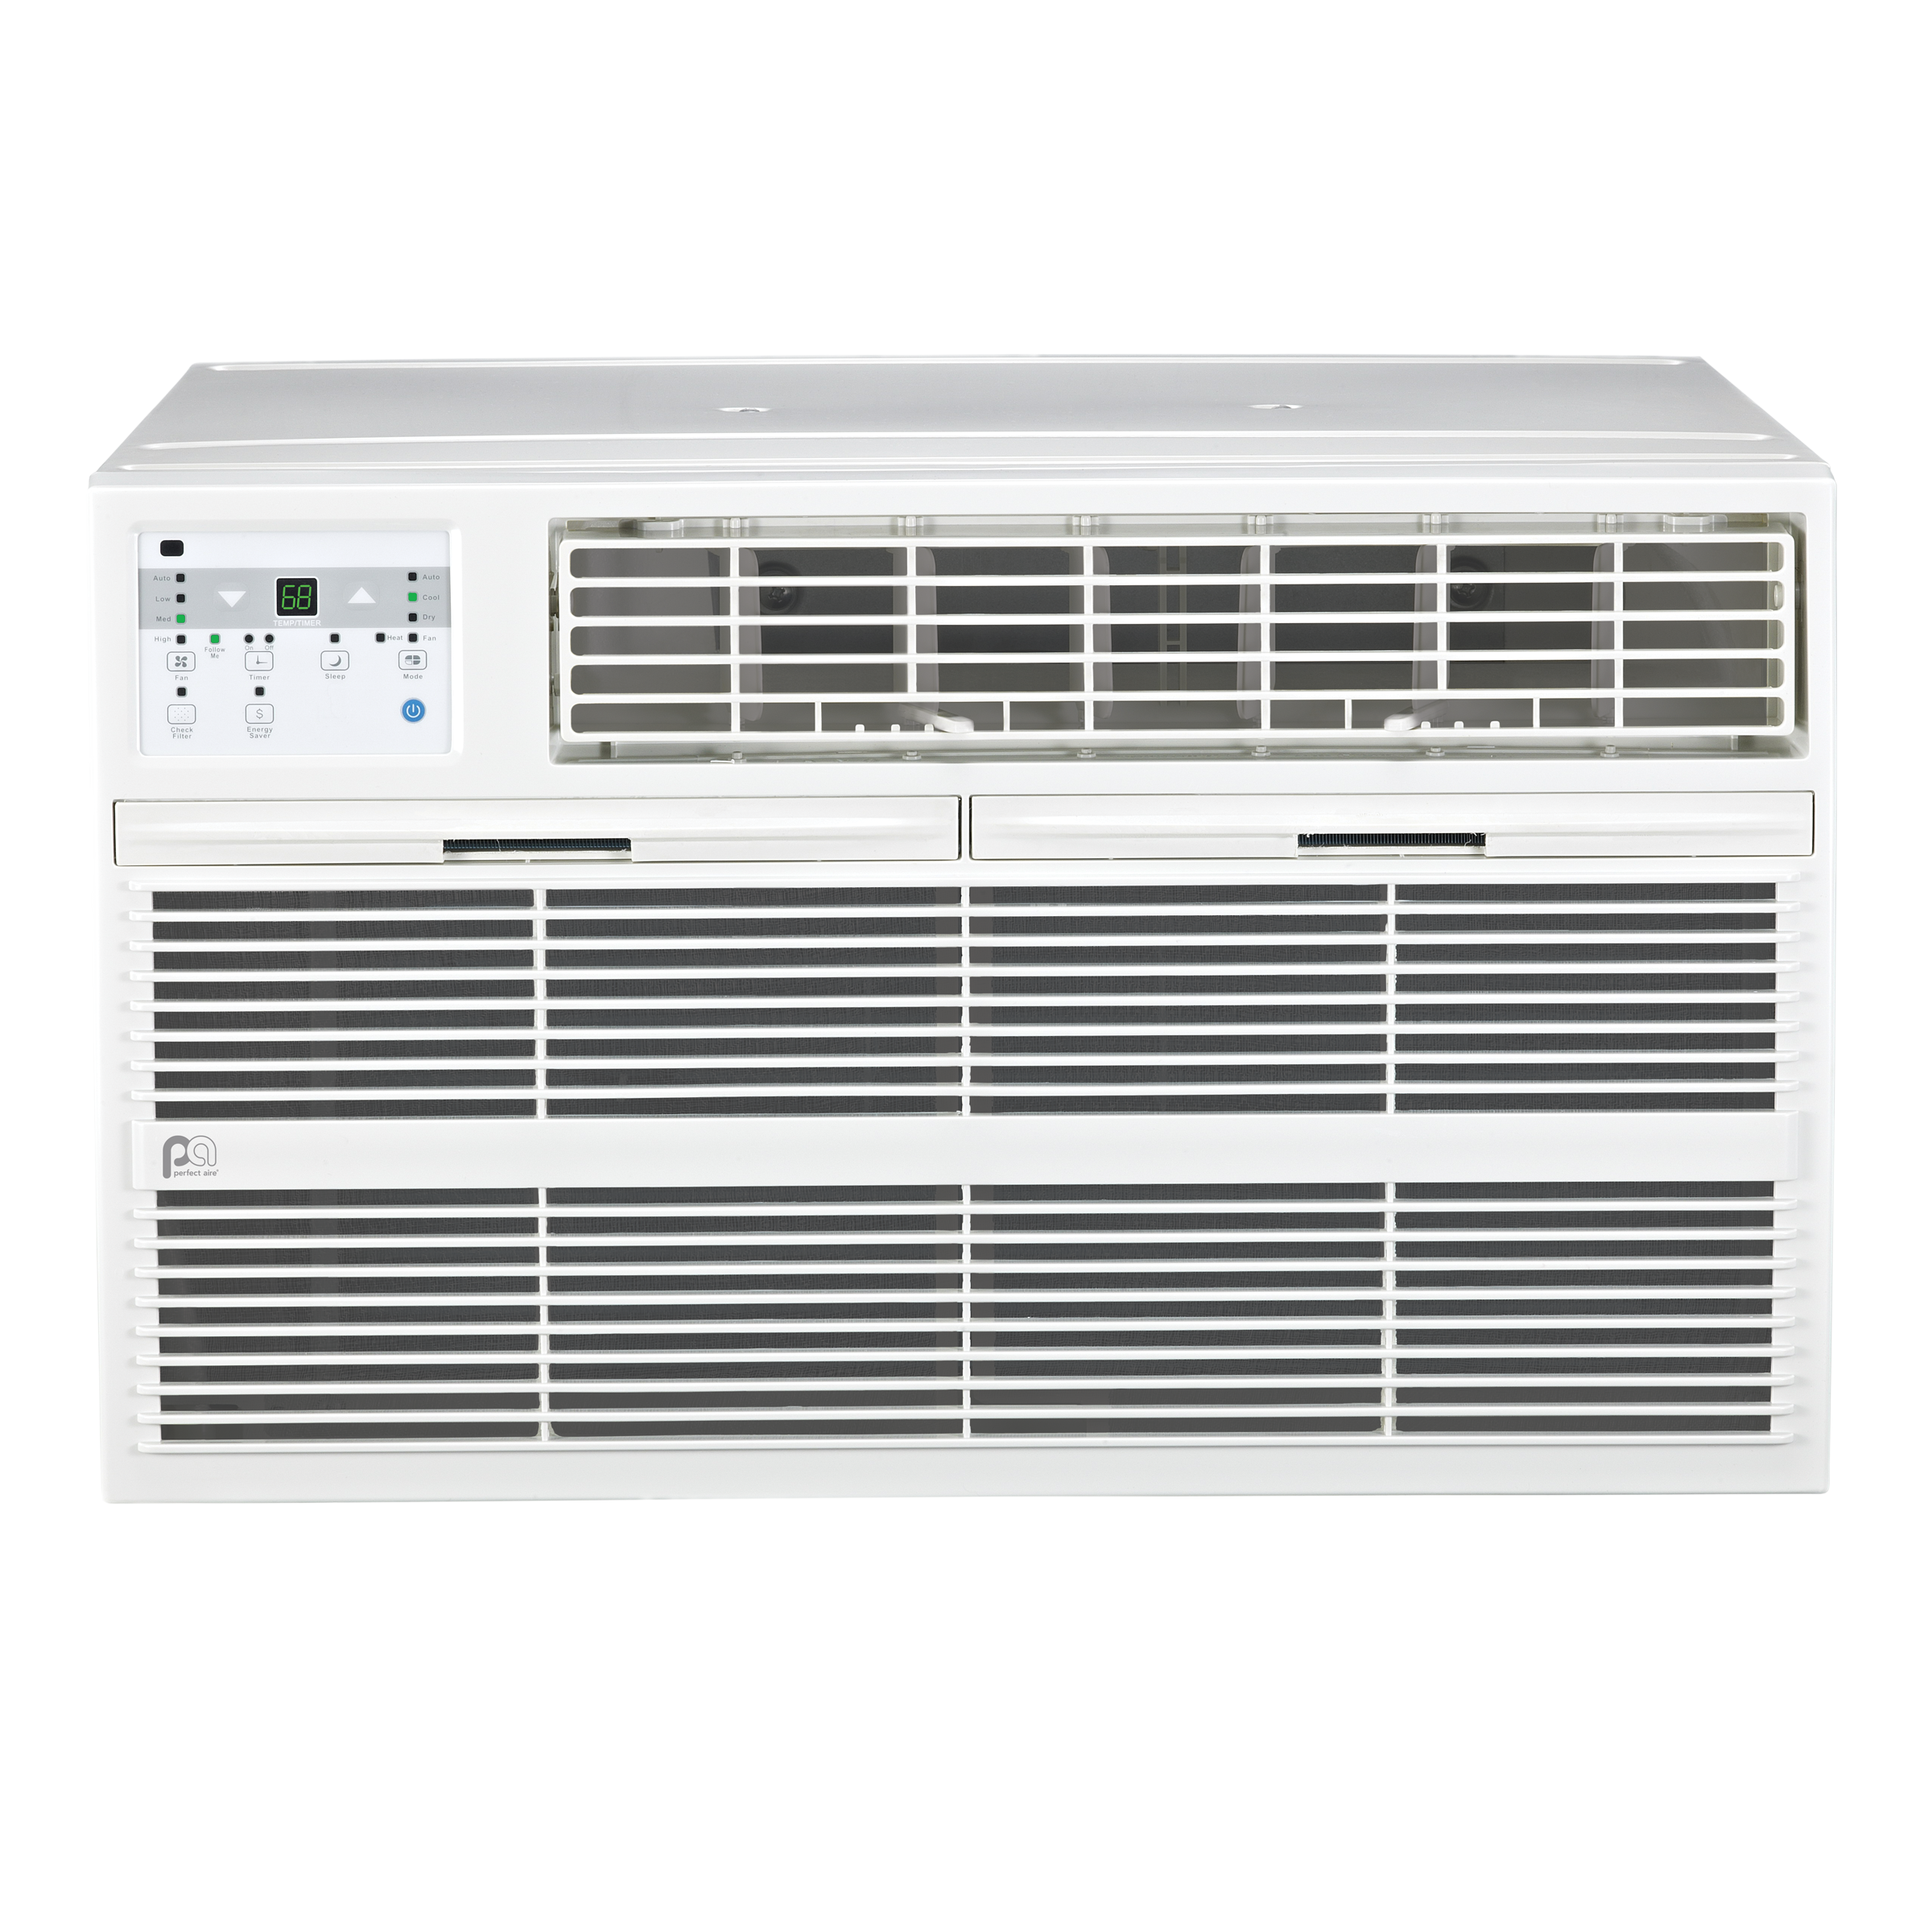 4PATW8000 Perfect Aire 8,000 BTU Thru-the-Wall Air Conditioner, Sq. ft: 300-350 Coverage, With Remote Control